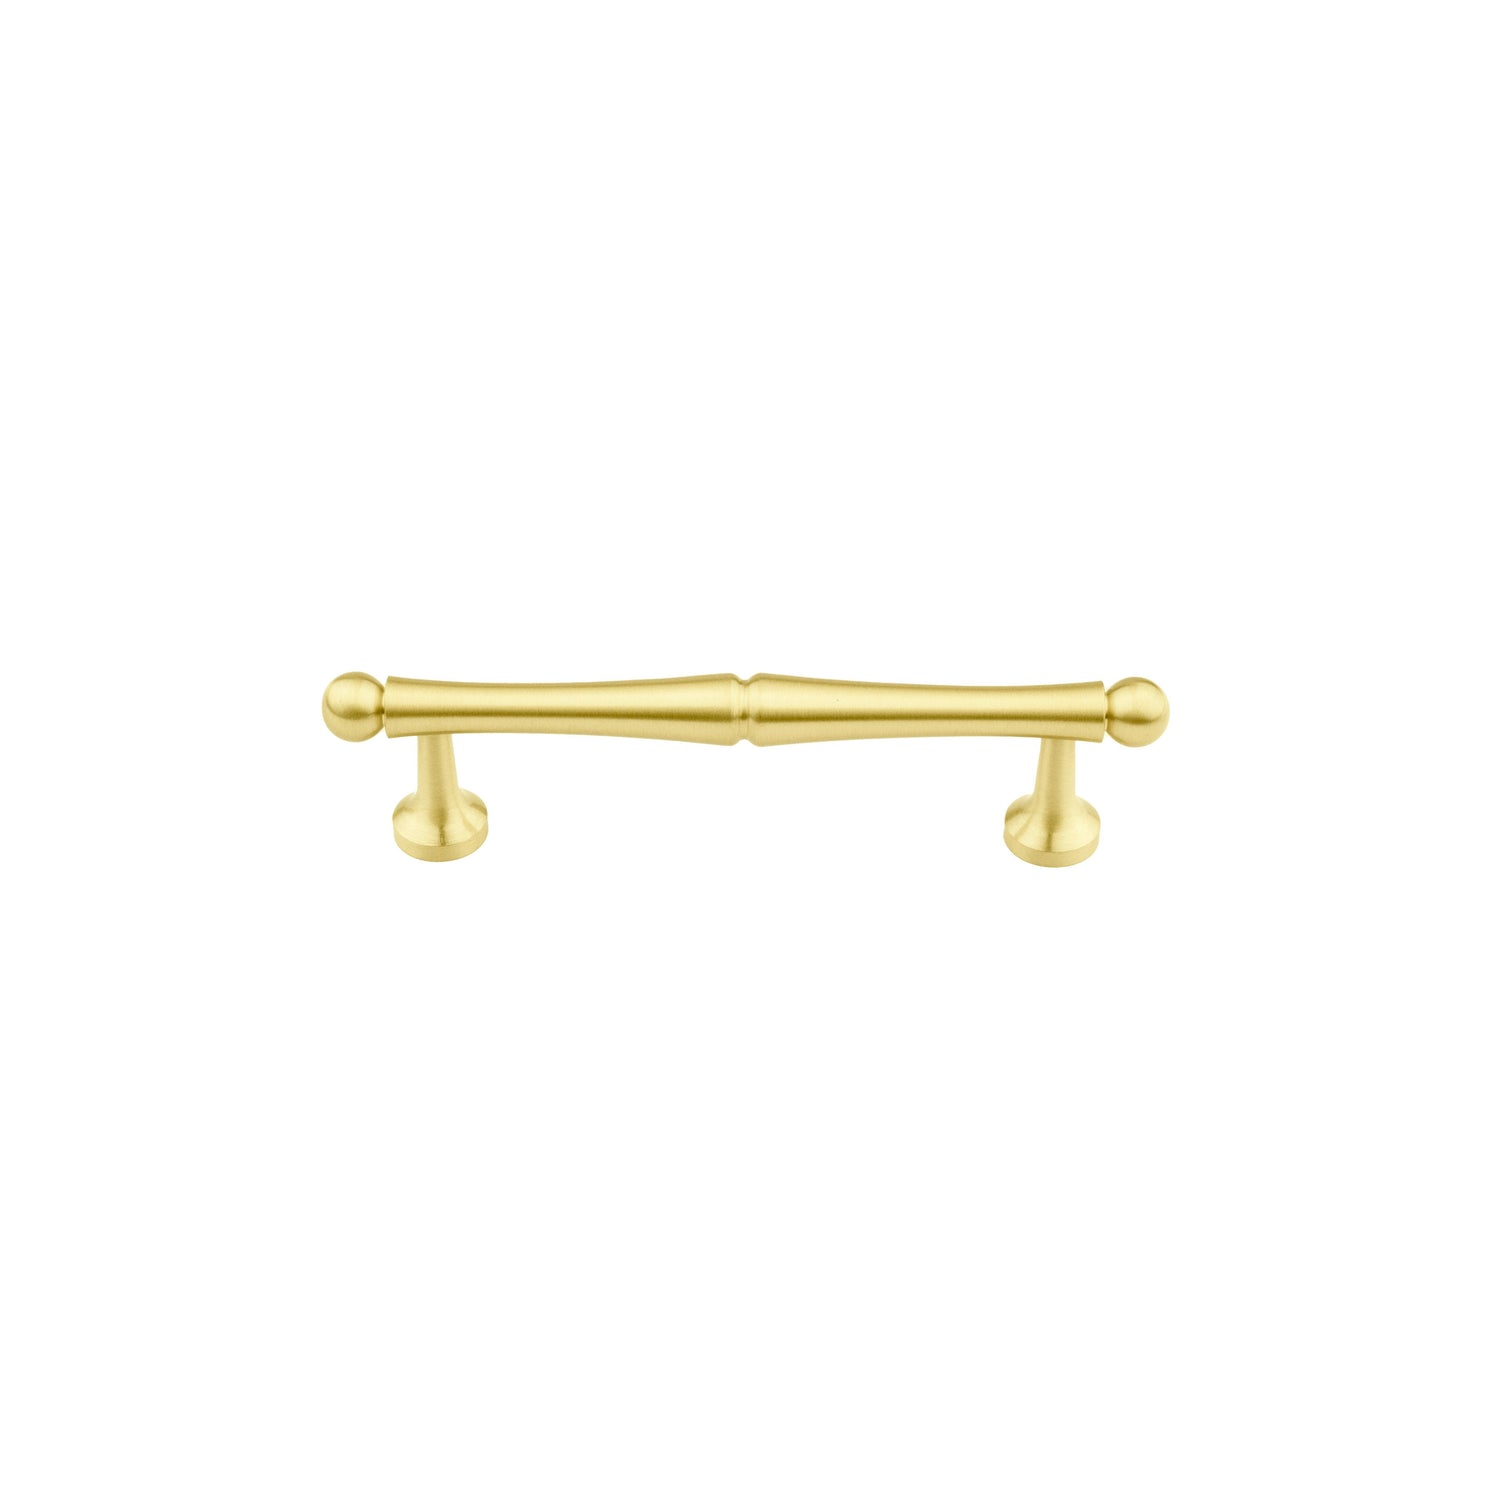 Giselle Handle Handles 125mm / Gold / Brass - M A N T A R A